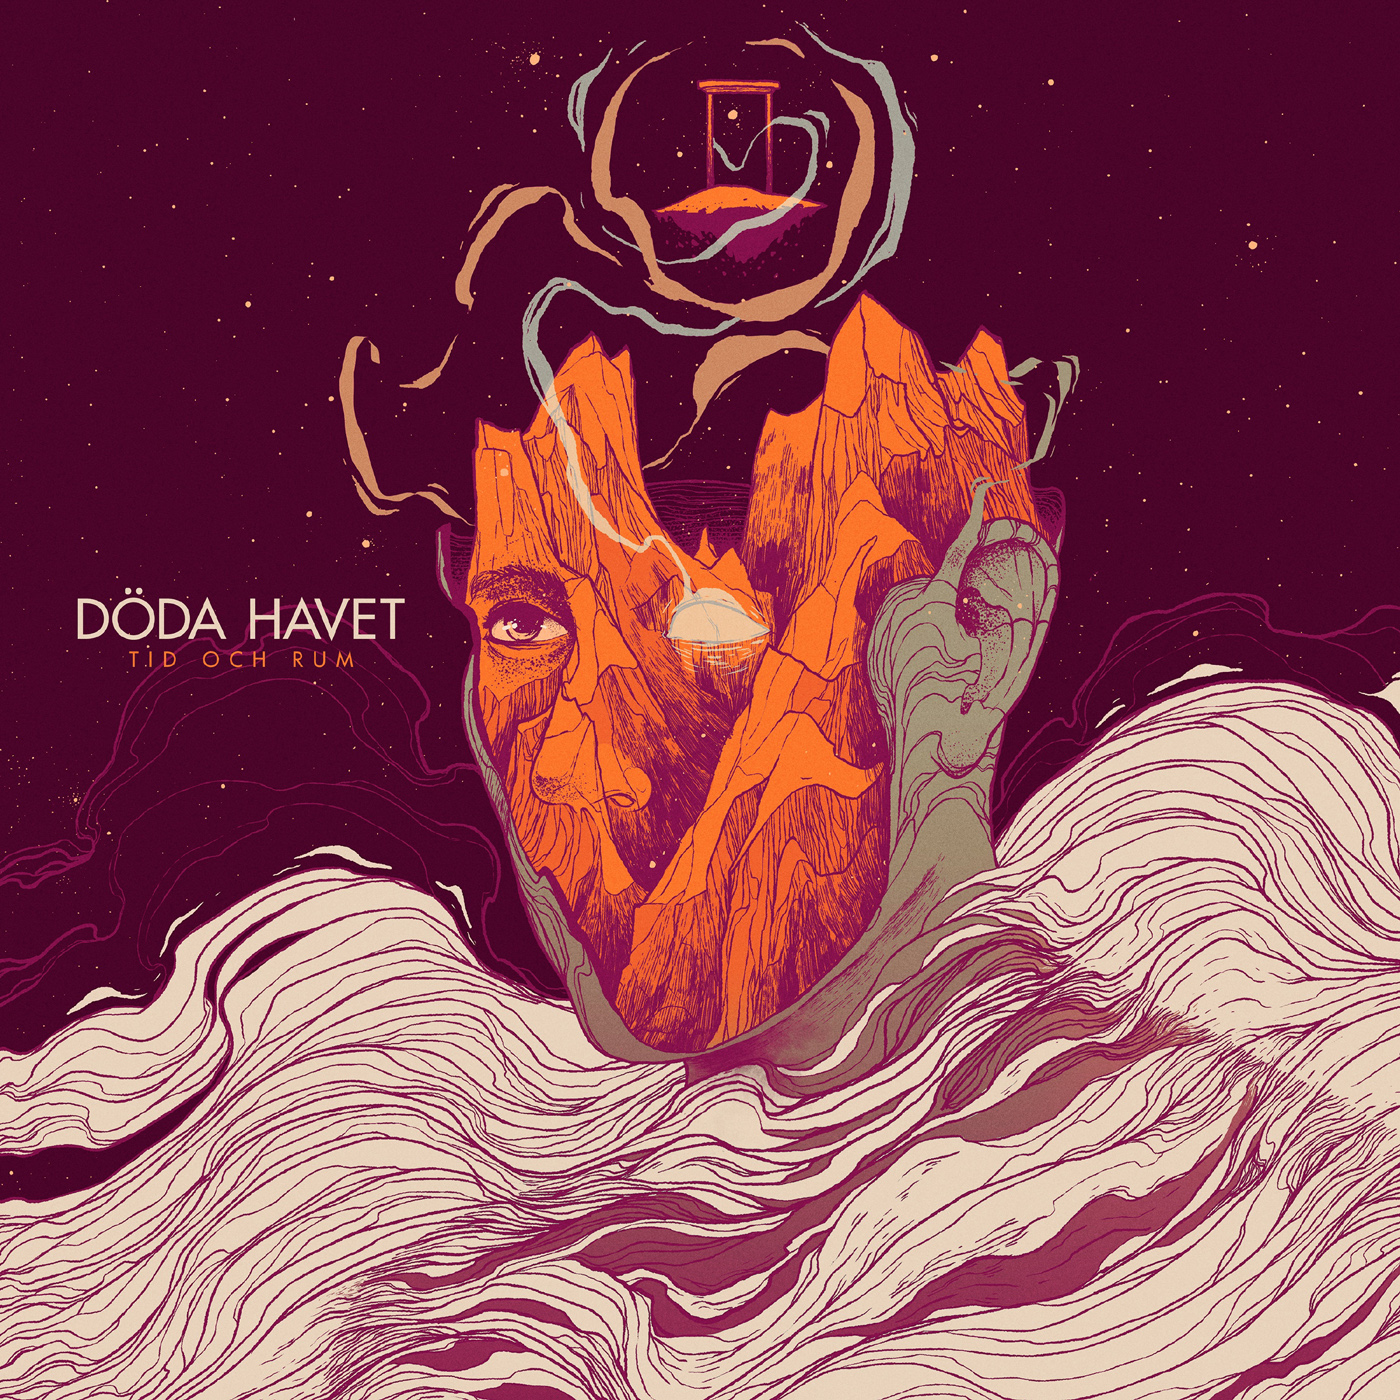 Read more about the article Neues DÖDA HAVET Album am 28.08.